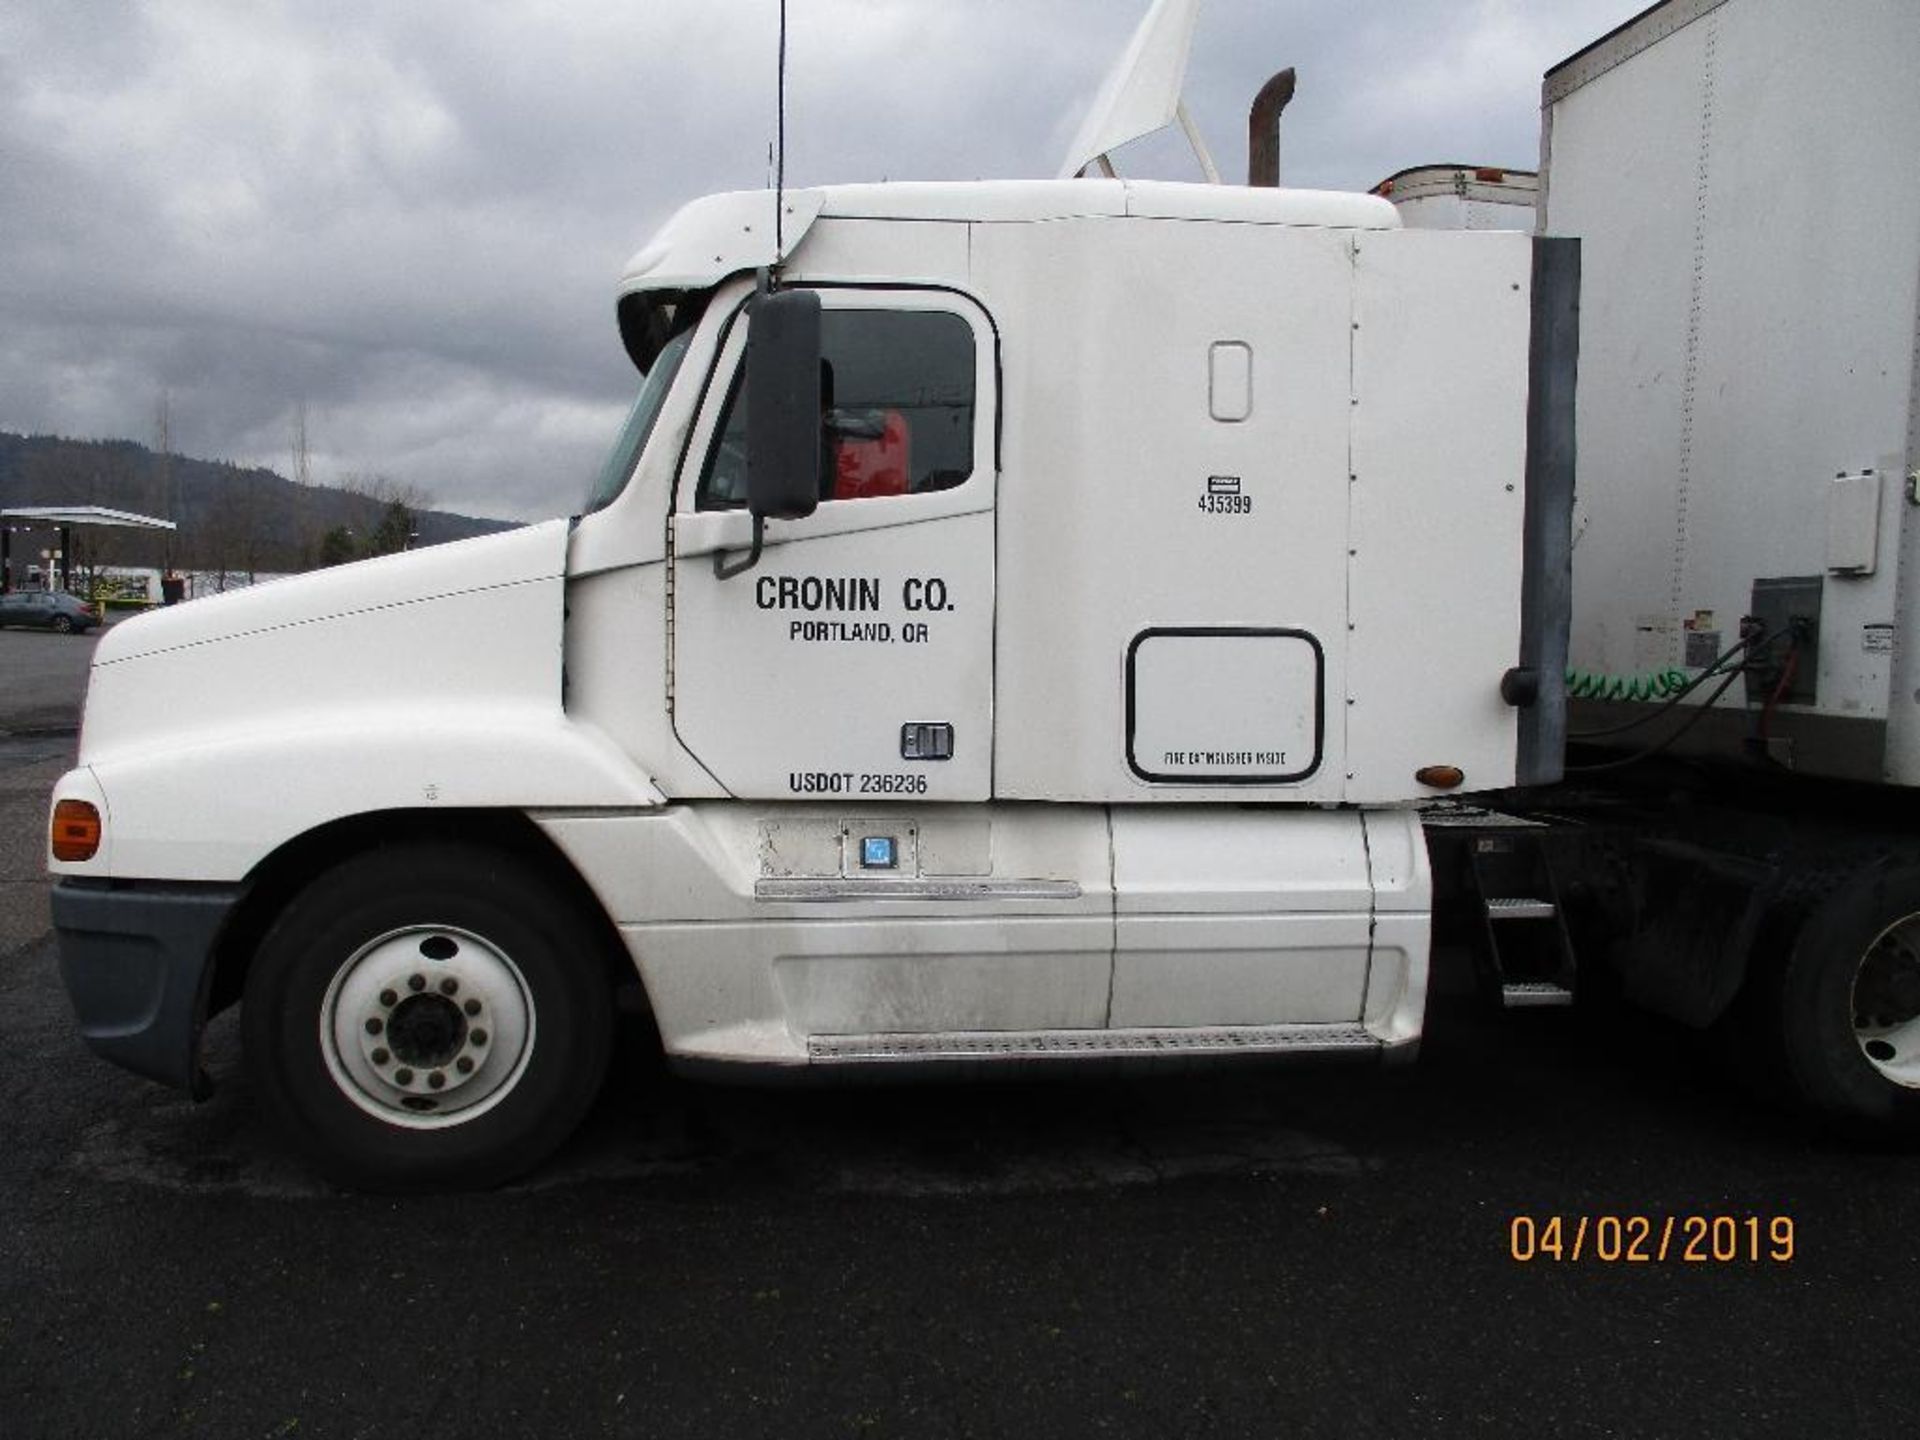 2004 Freightliner Tractor, GVWR 52,000lb, 814,523 Miles, VIN #1FUJBBCK45PU91882 - Image 3 of 10